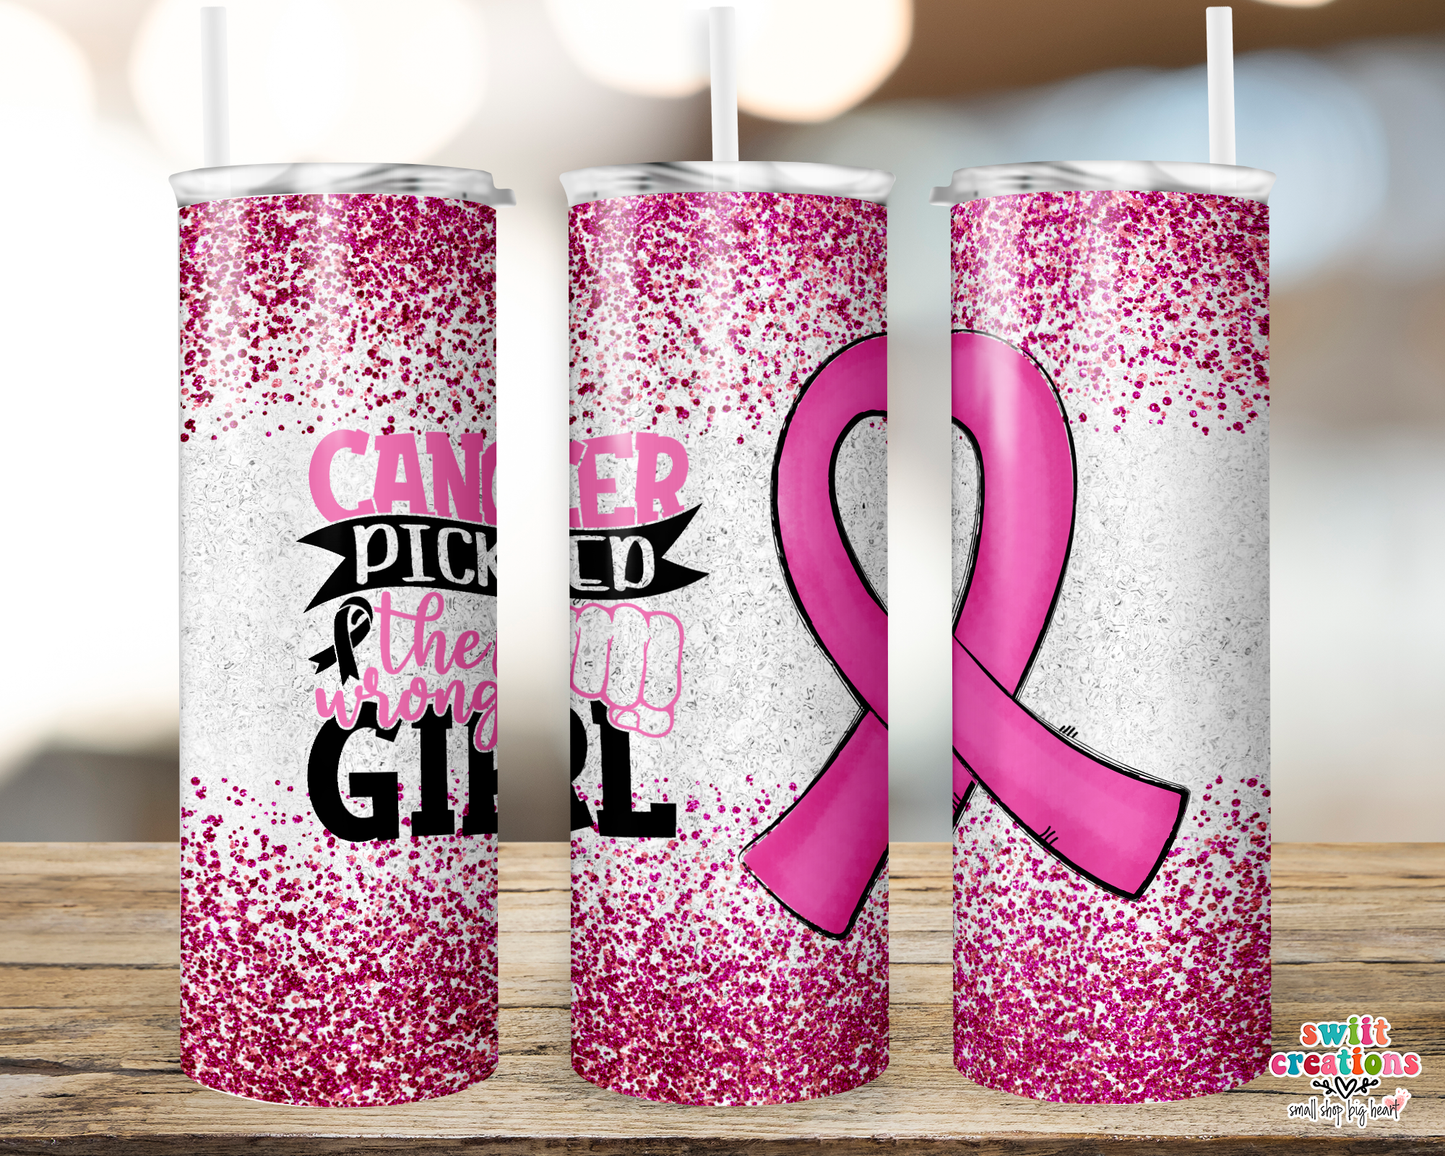 Cancer Picked The Wrong Girl Tumbler (T251)